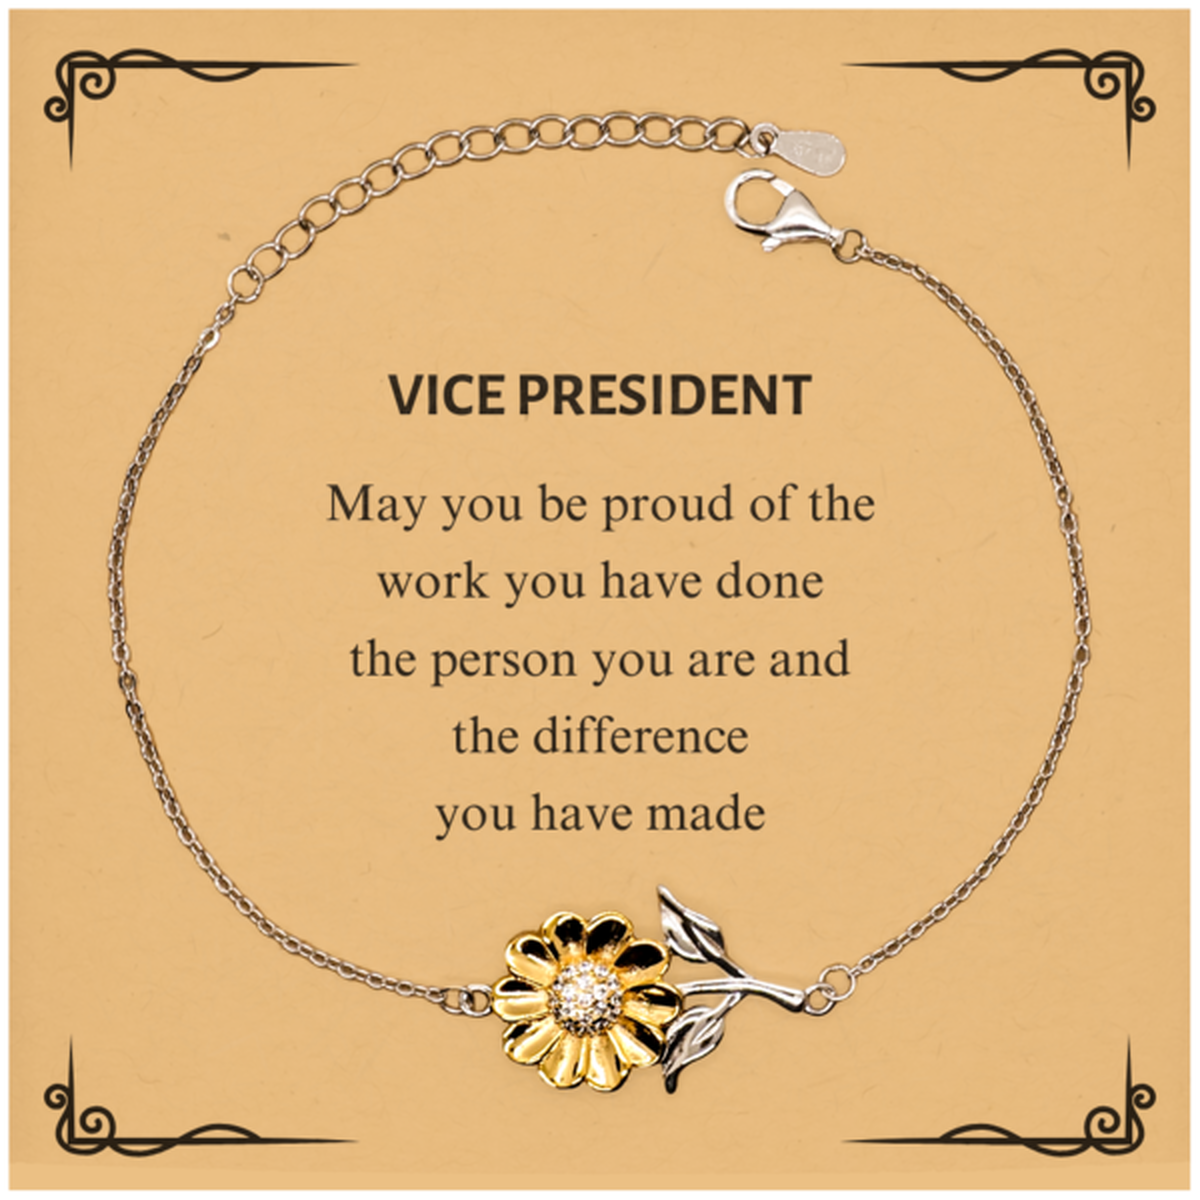 Vice President May you be proud of the work you have done, Retirement Vice President Sunflower Bracelet for Colleague Appreciation Gifts Amazing for Vice President